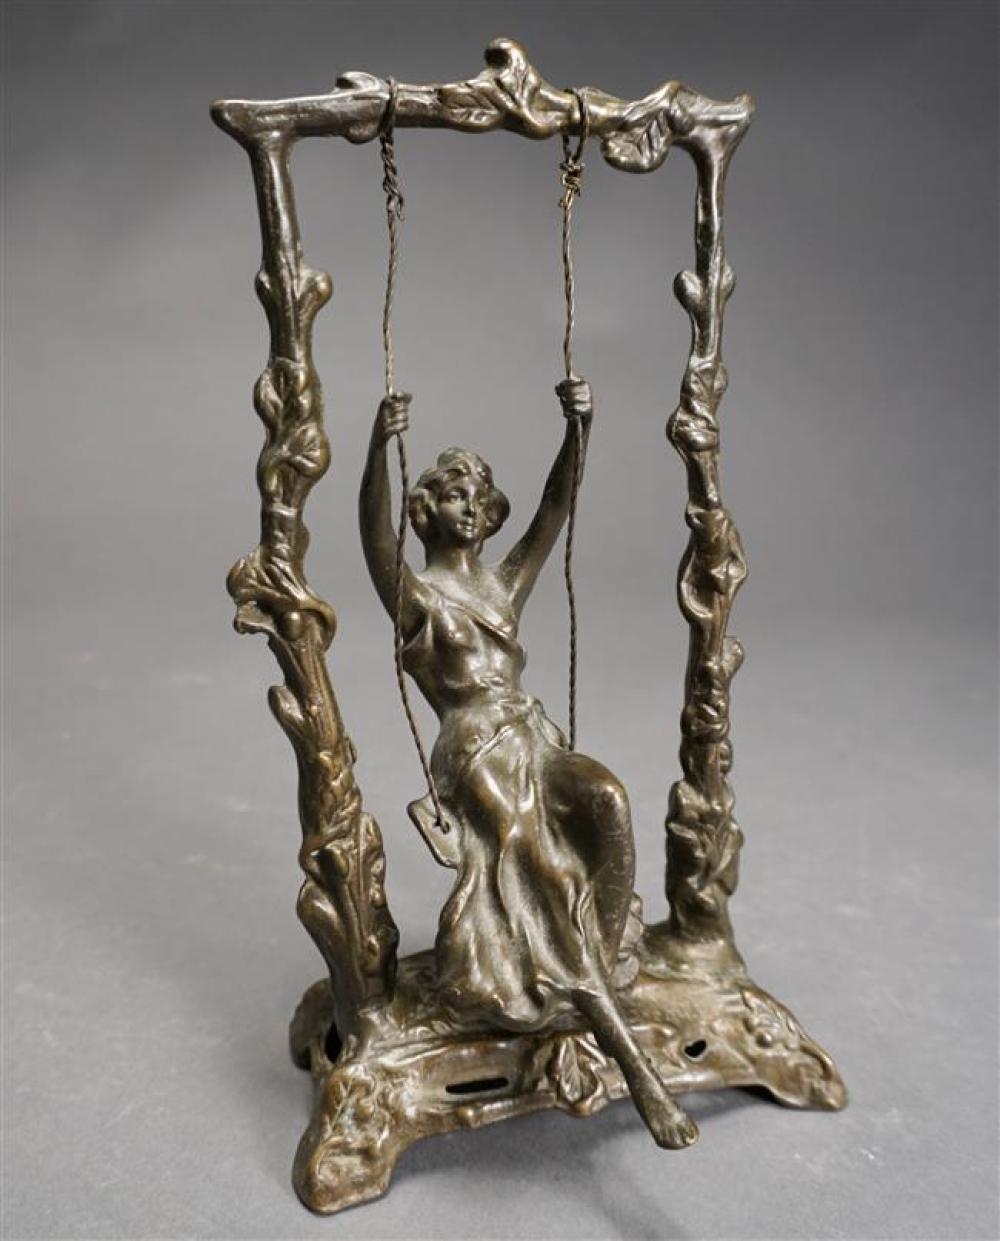 BRONZE SCULPTURE OF LADY ON A SWING,